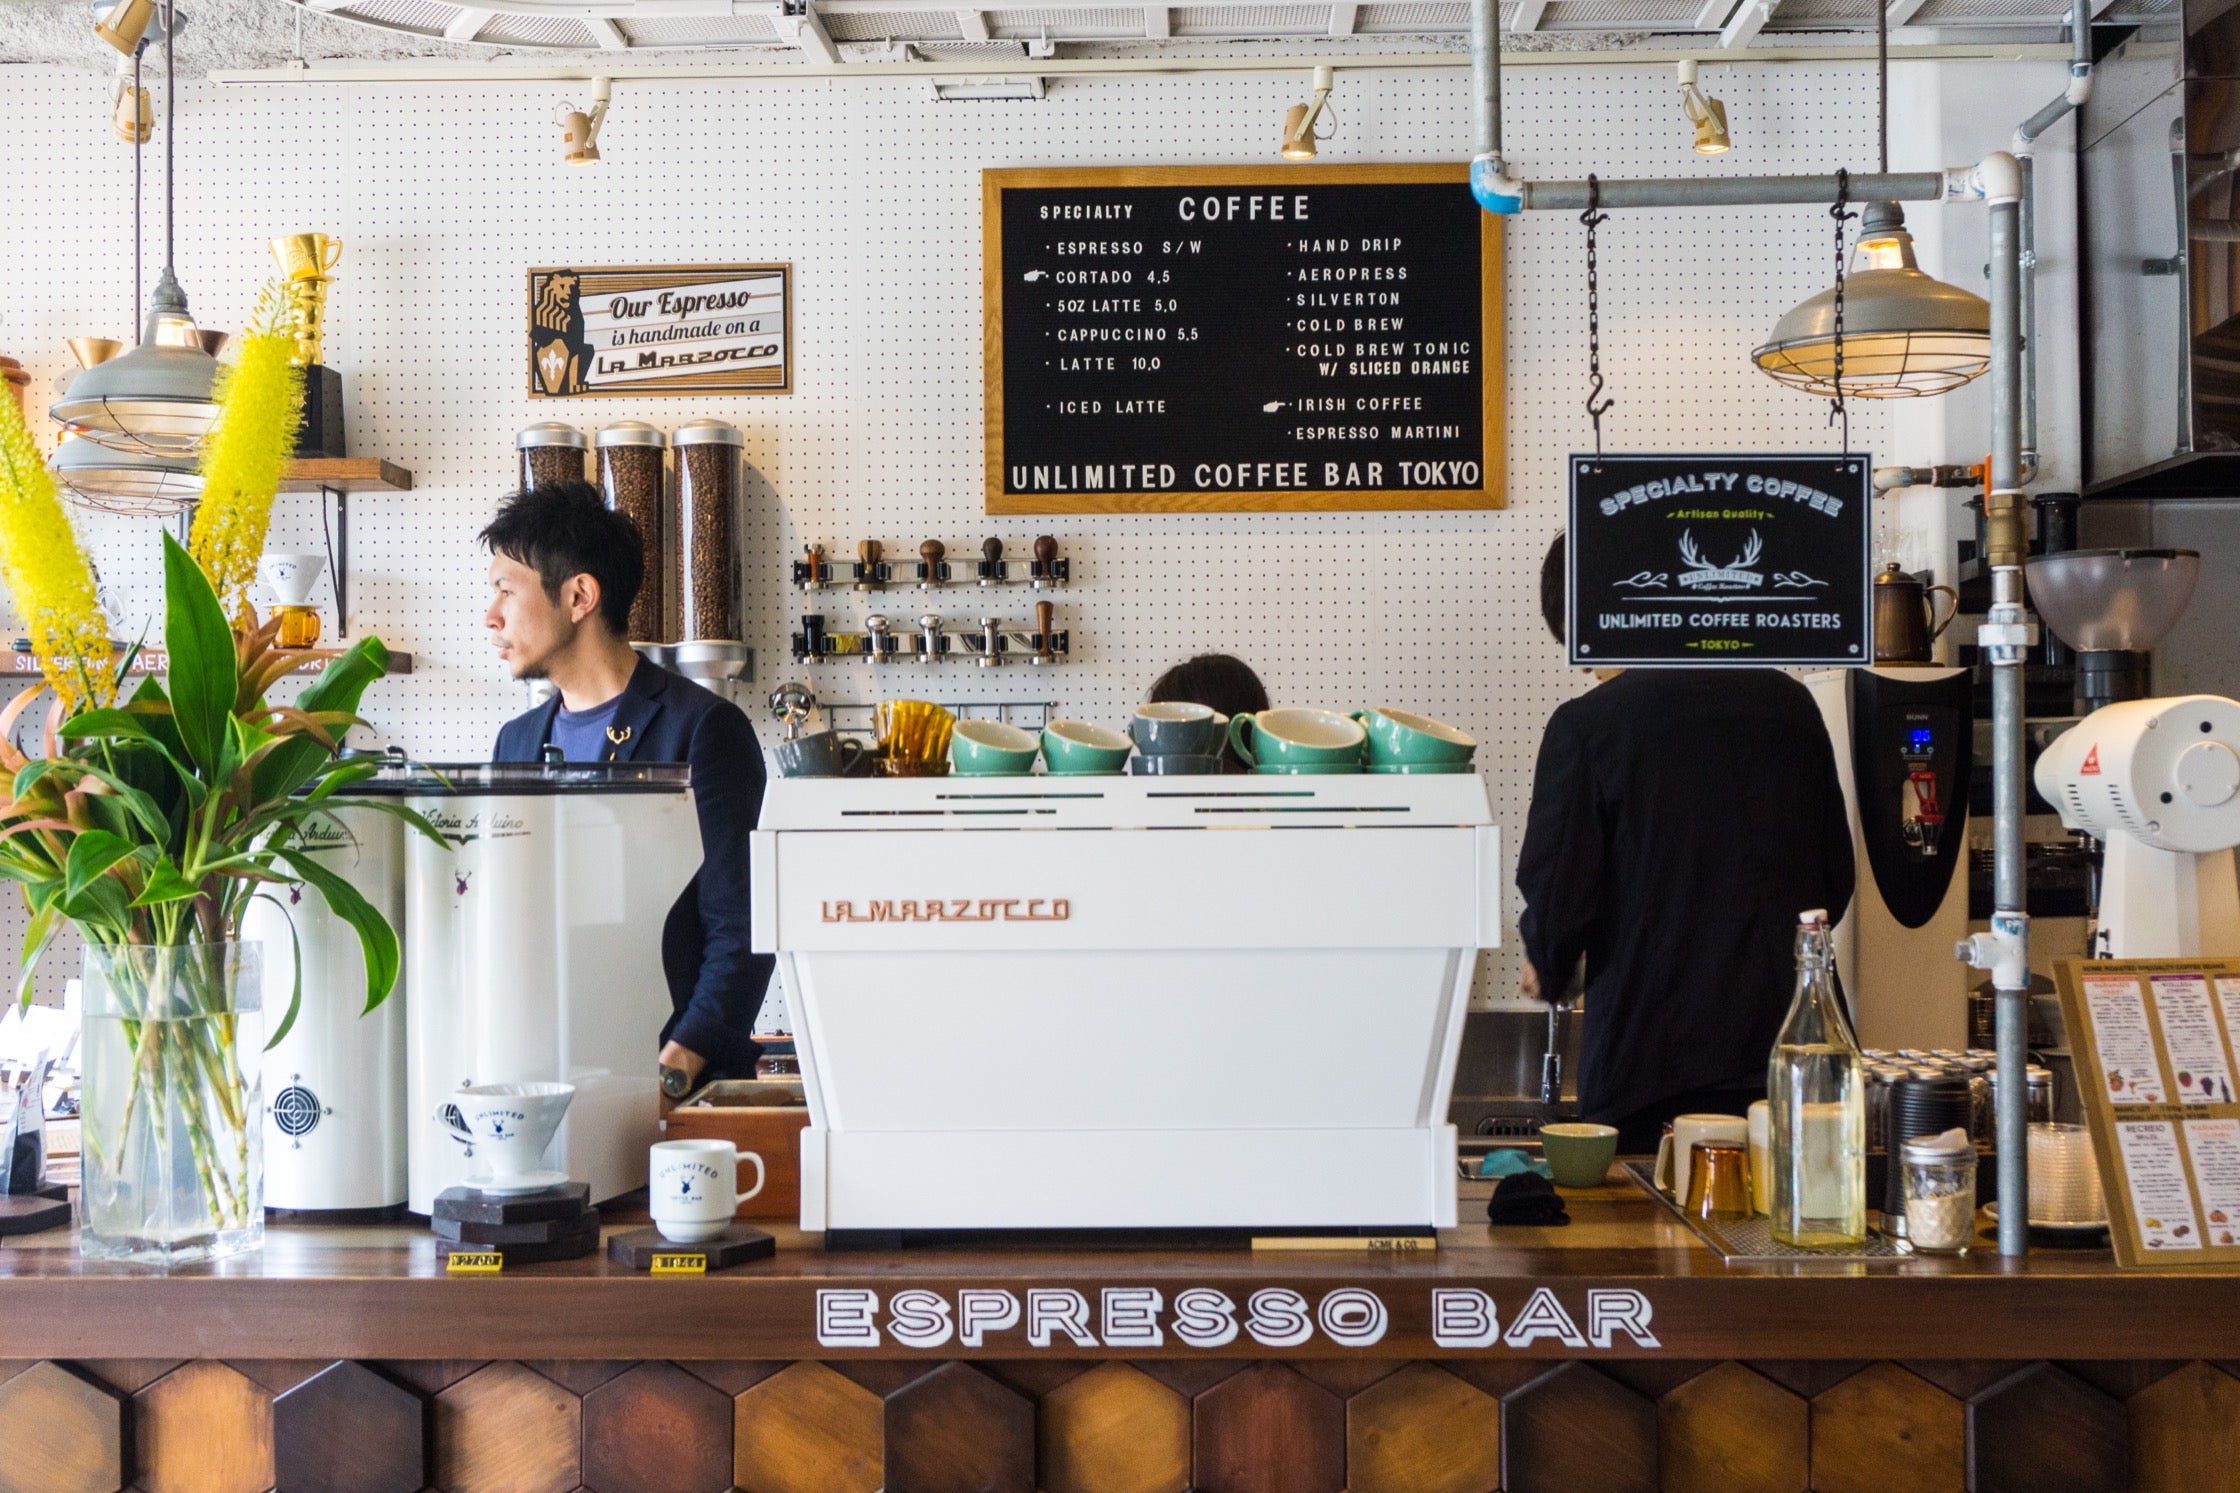 The Unlimited Coffee Bar in Tokyo